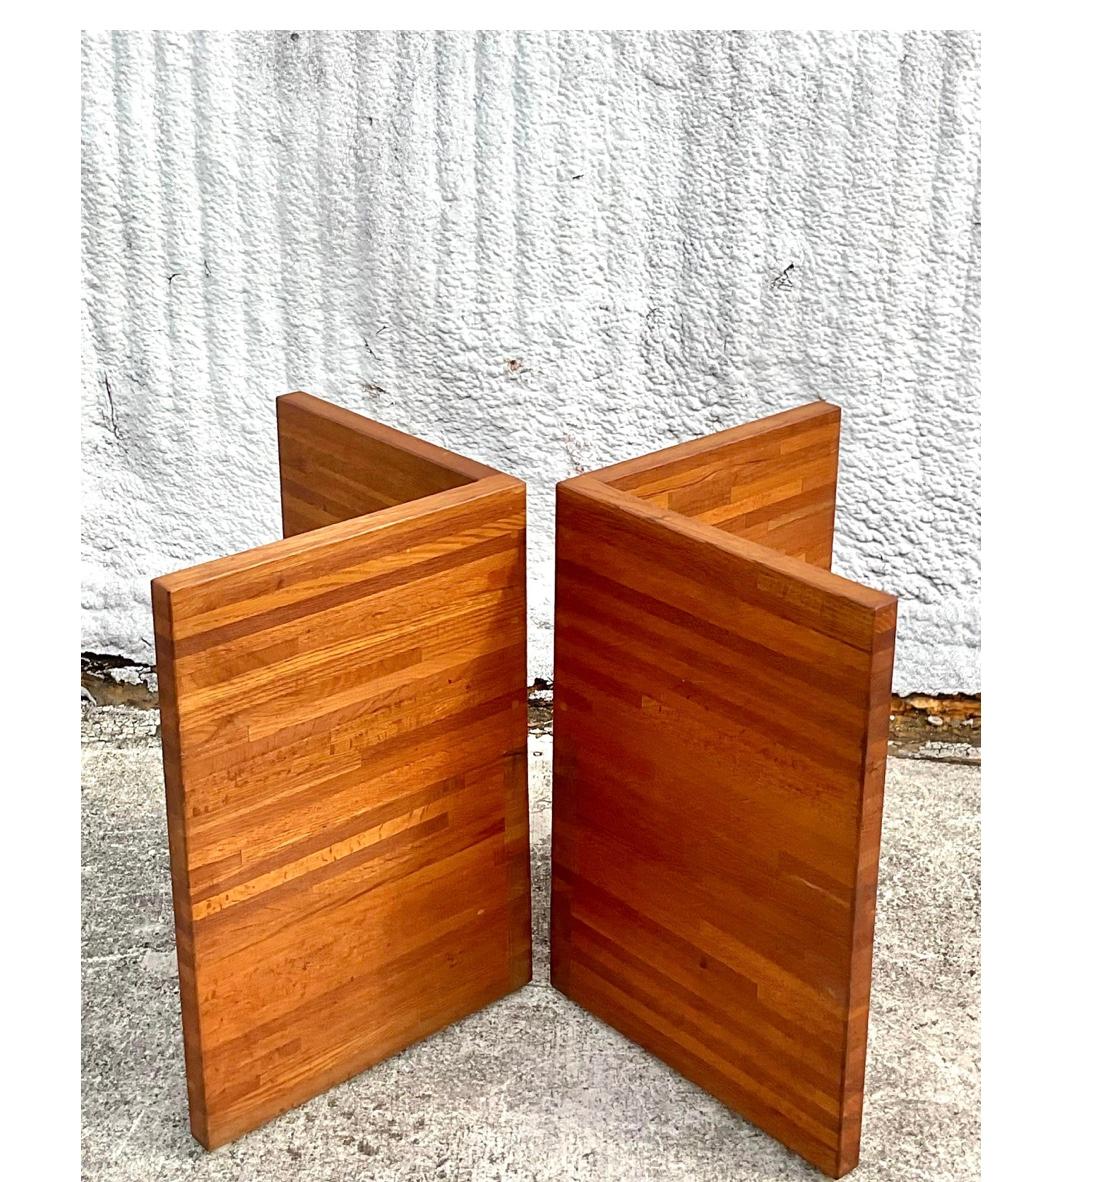 20th Century Midcentury Slab Butcher Block L Shaped Dining Table Pedestals - a Pair